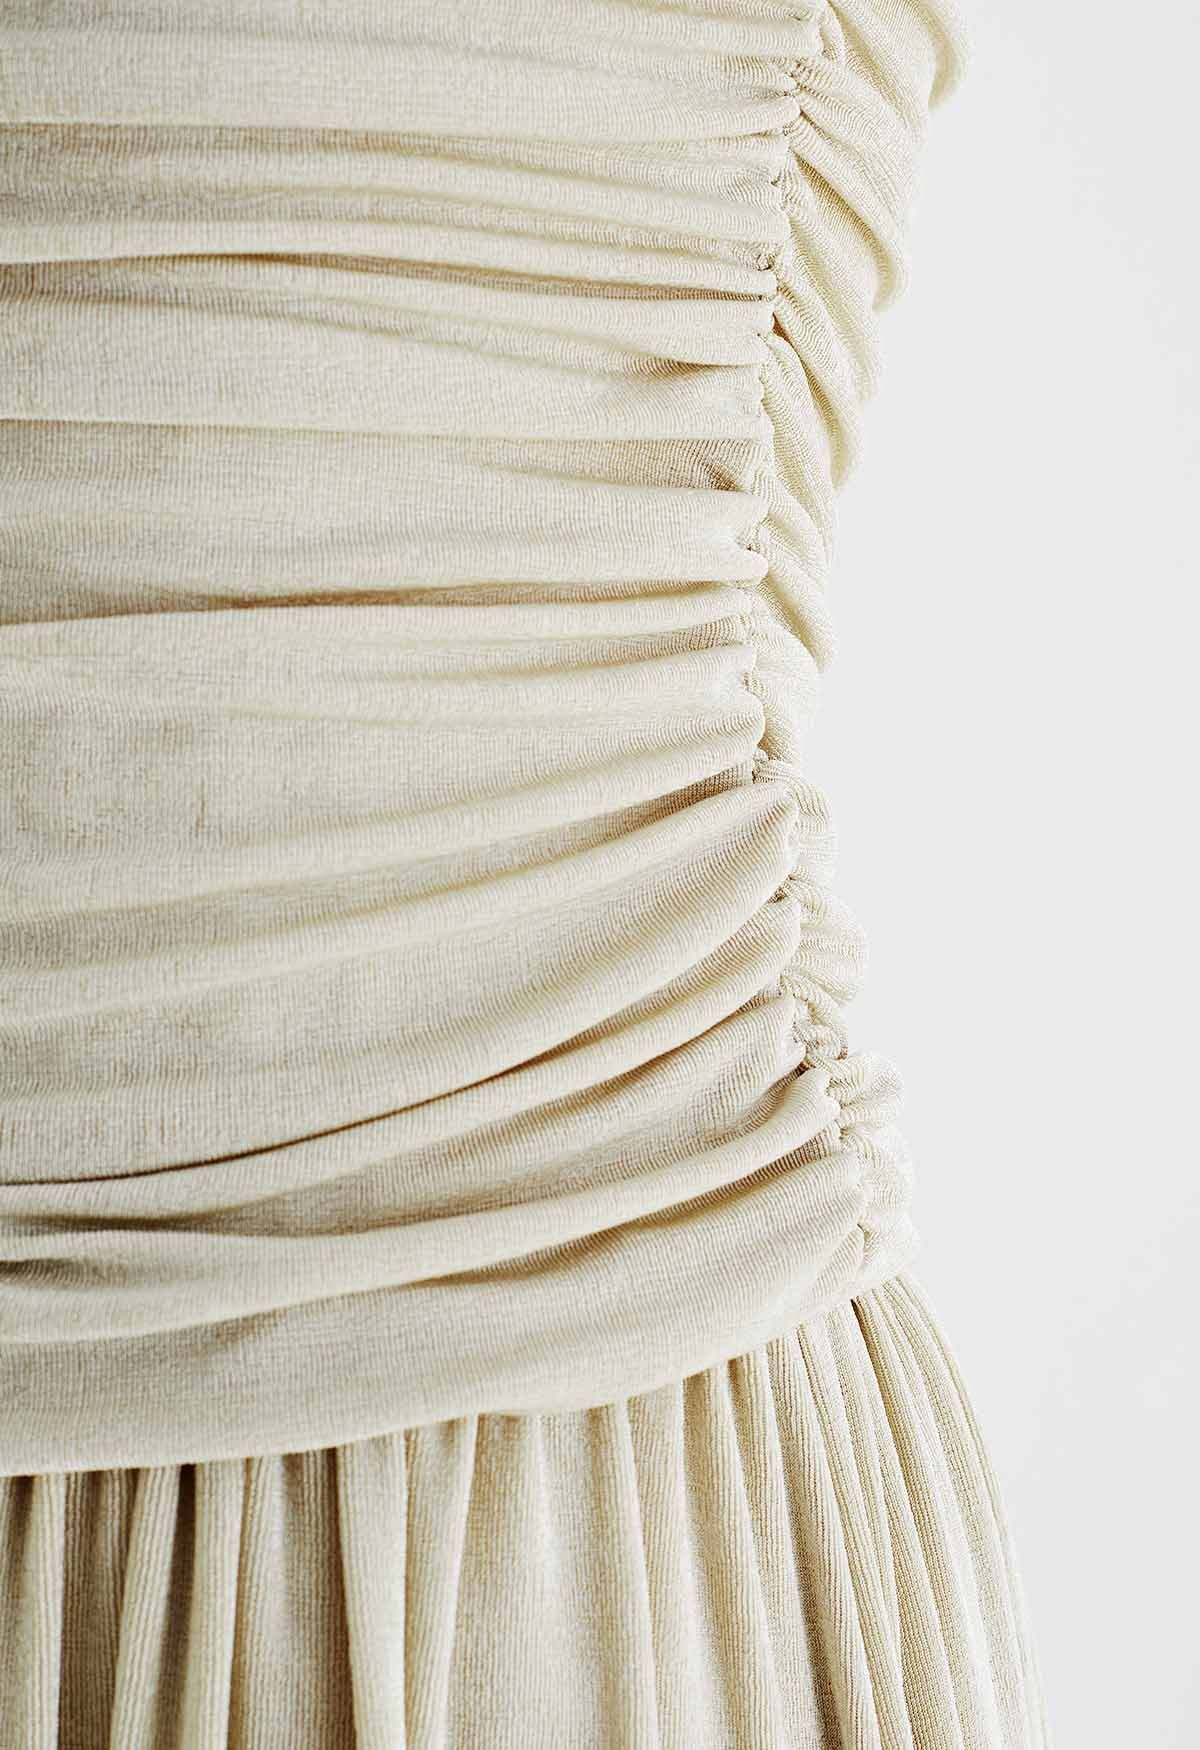 Ruched Elegance Cami Maxi Dress in Sand